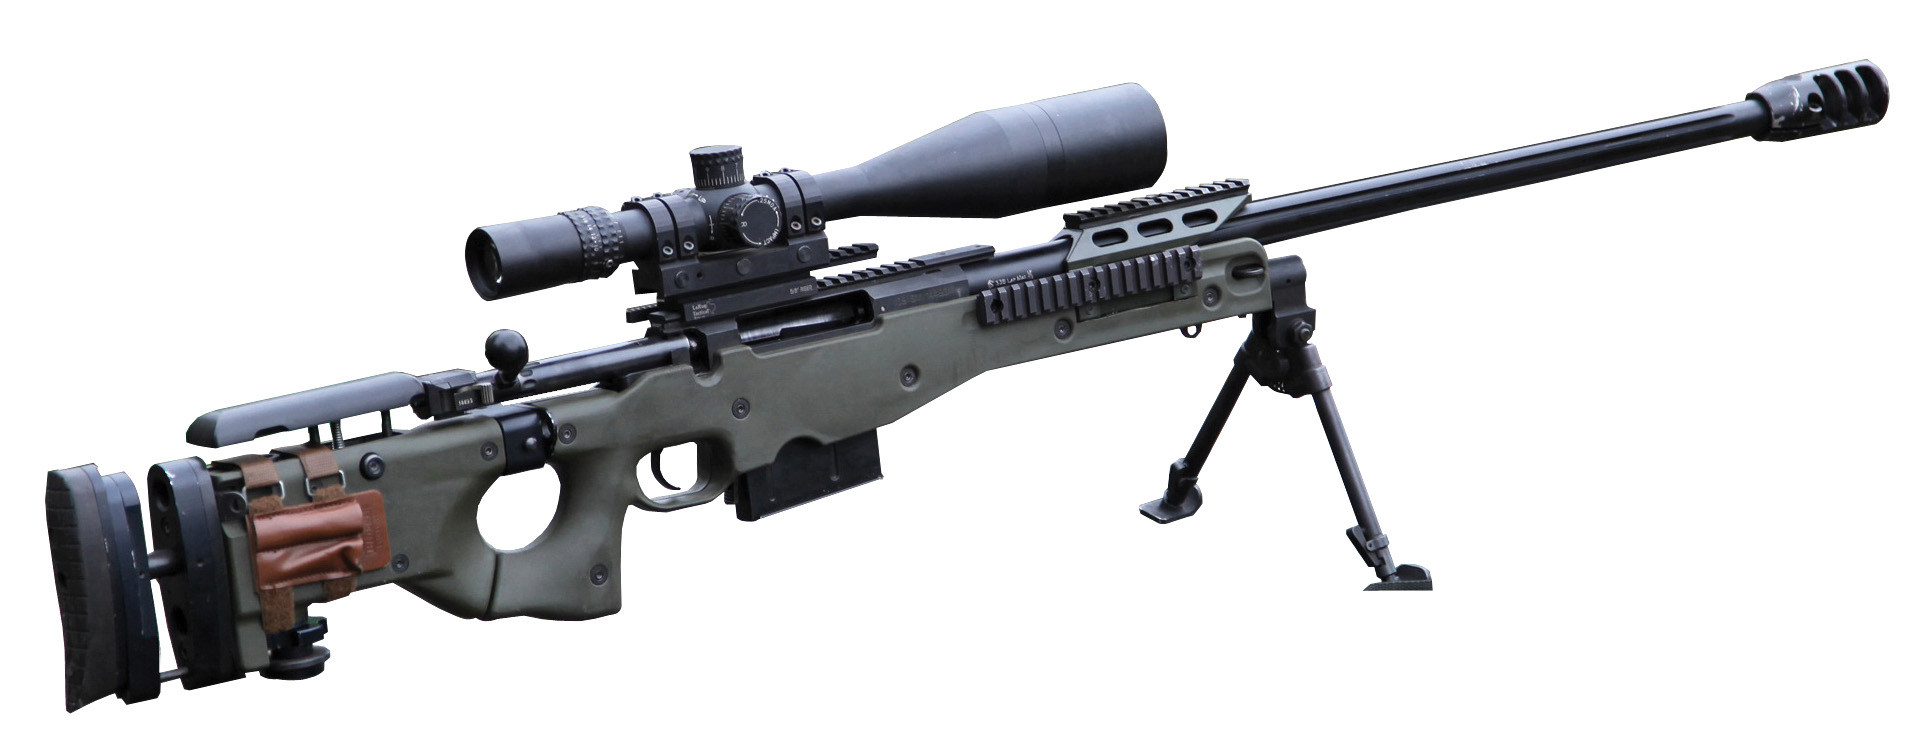 The heaviest weapon that Kyle used on missions in Iraq was the bolt-action .338 Lapua. The cartridge’s power and range approached that of a .50-caliber Browning Machine Gun round.